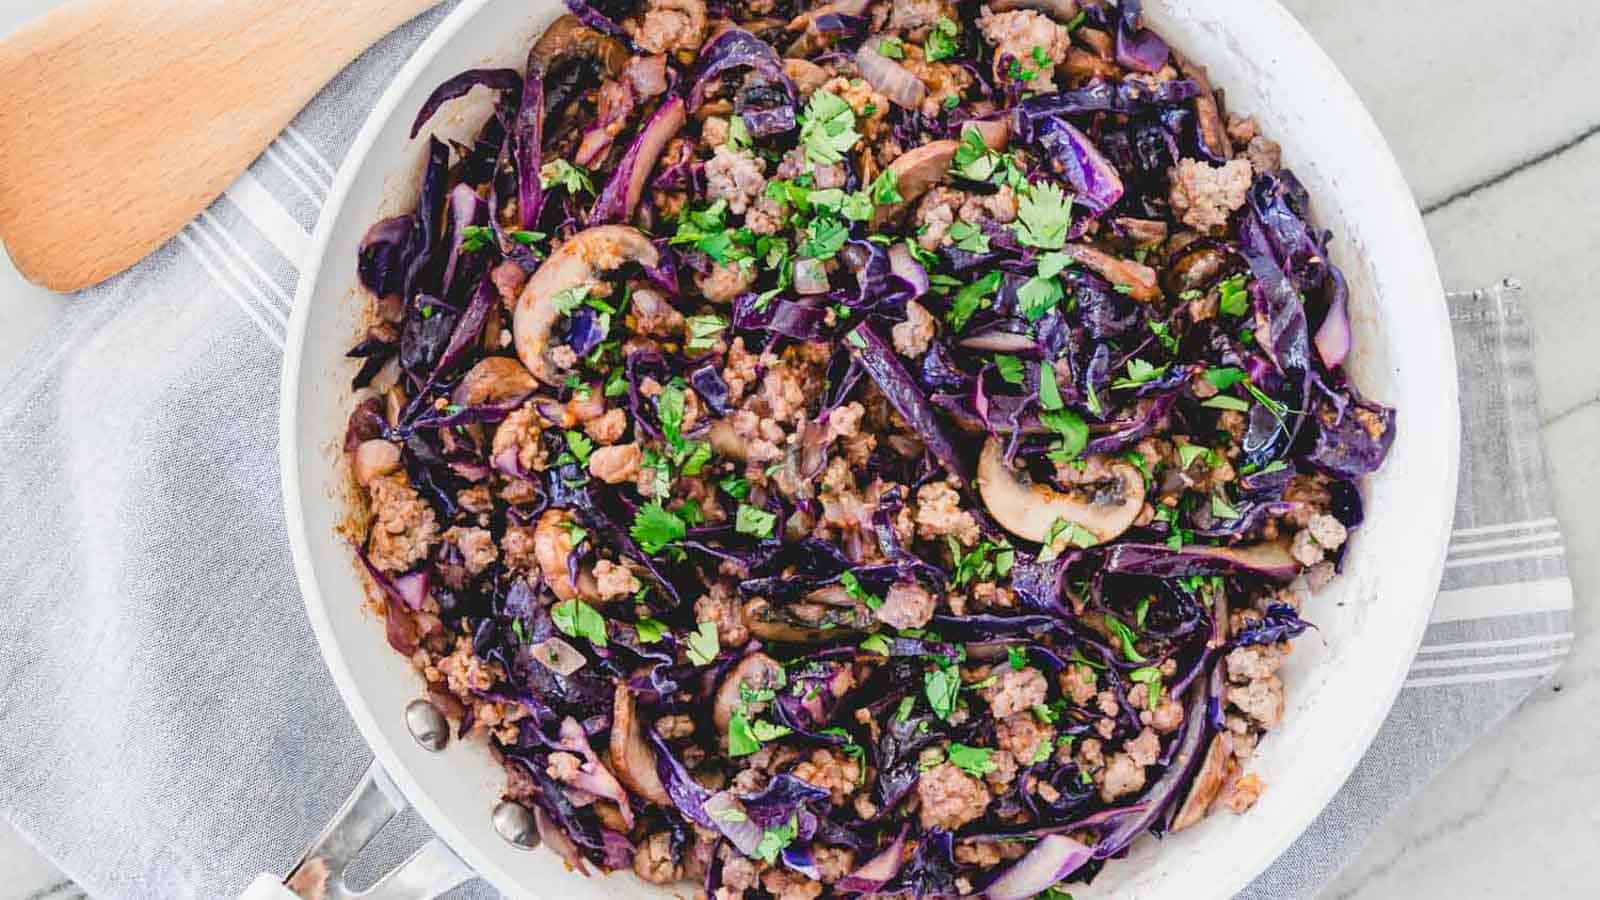 17 one-pan dinners that'll make weeknights a breeze